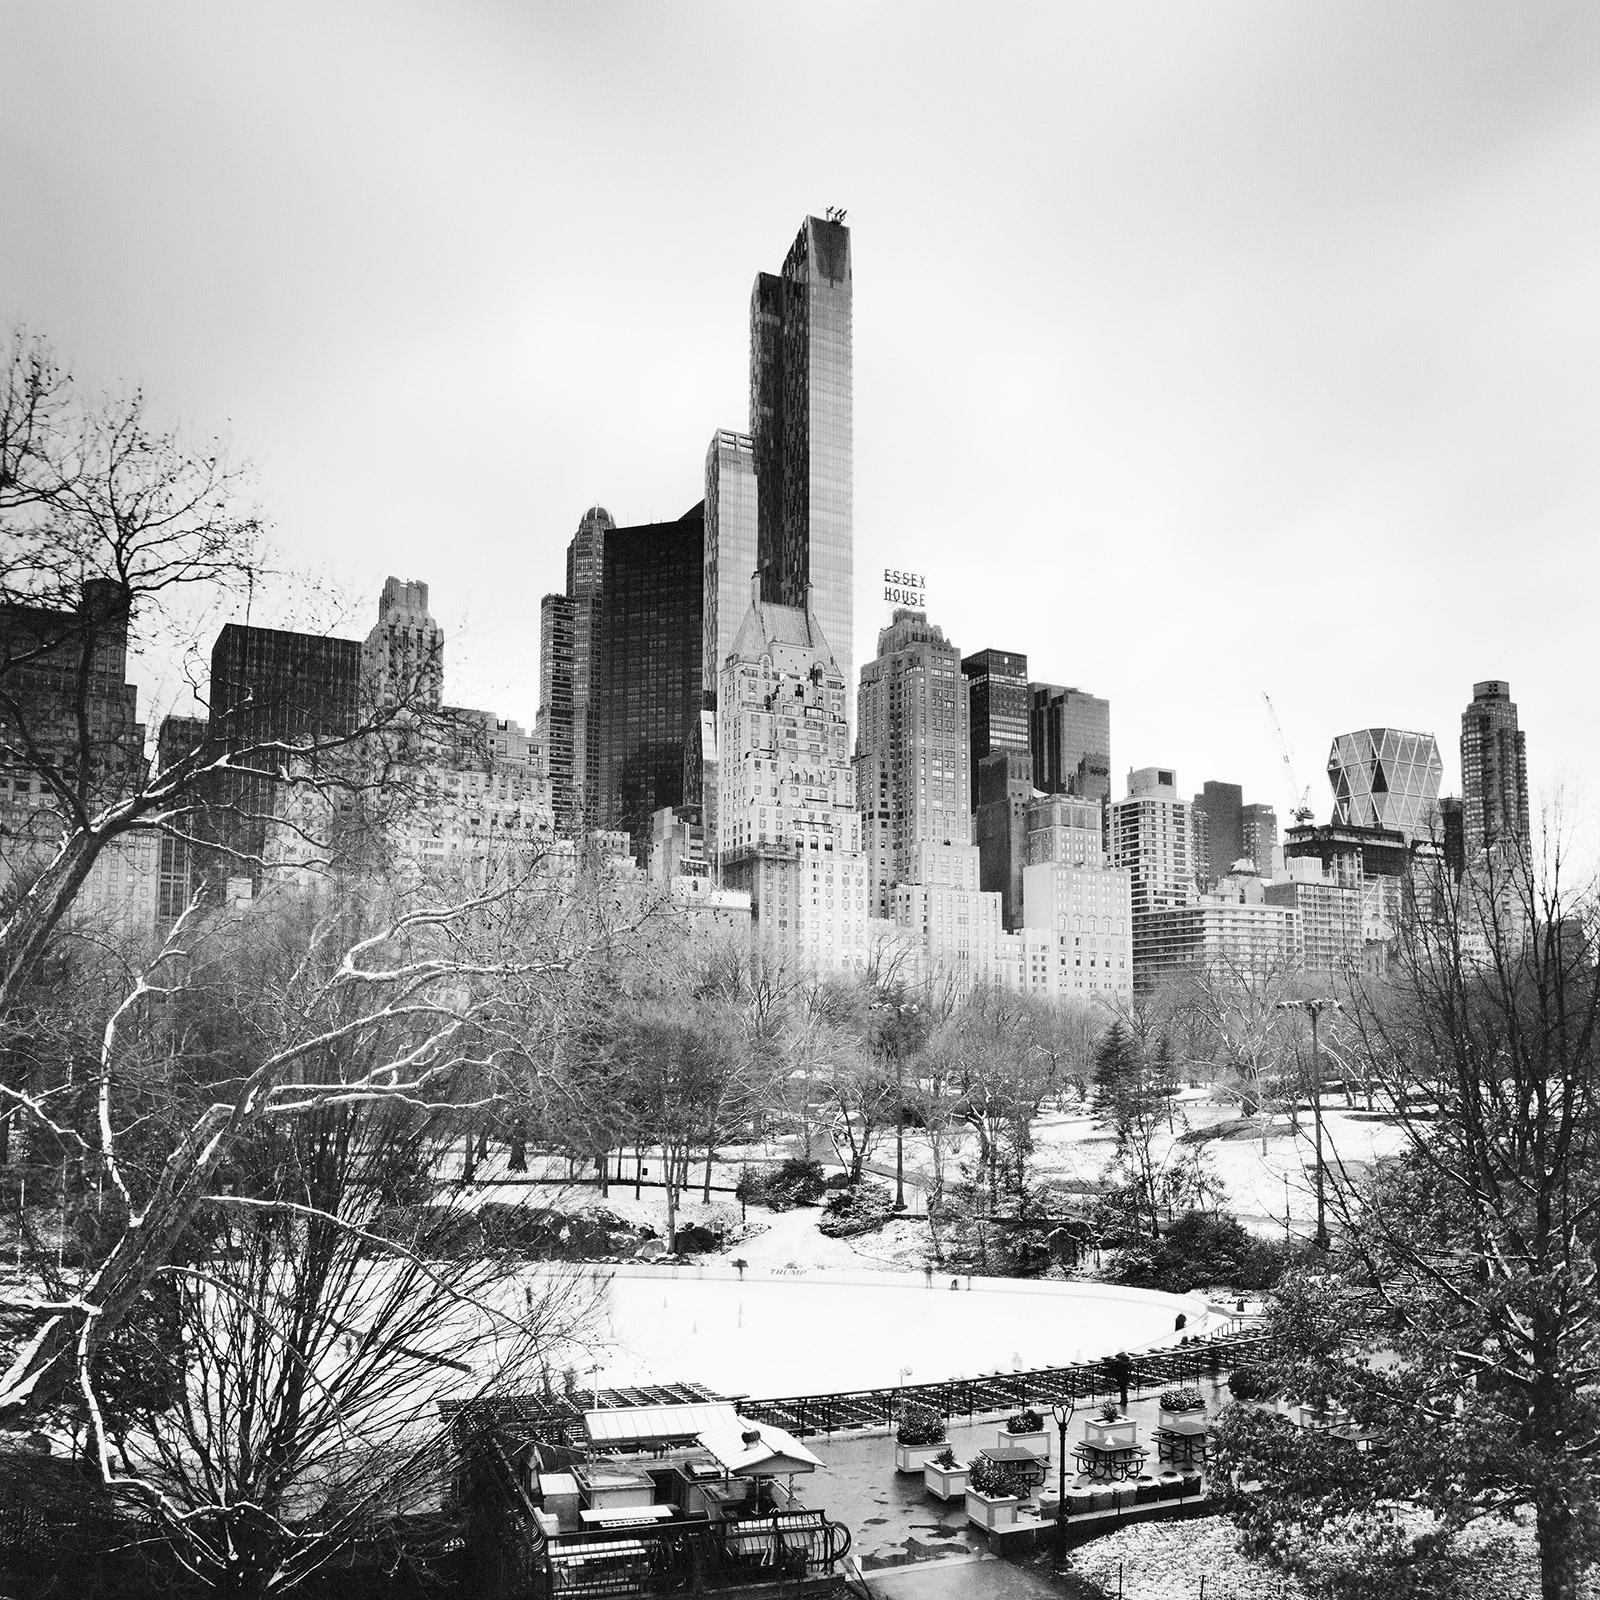 Essex House, Central Park, New York, USA, black and white photography, cityscape